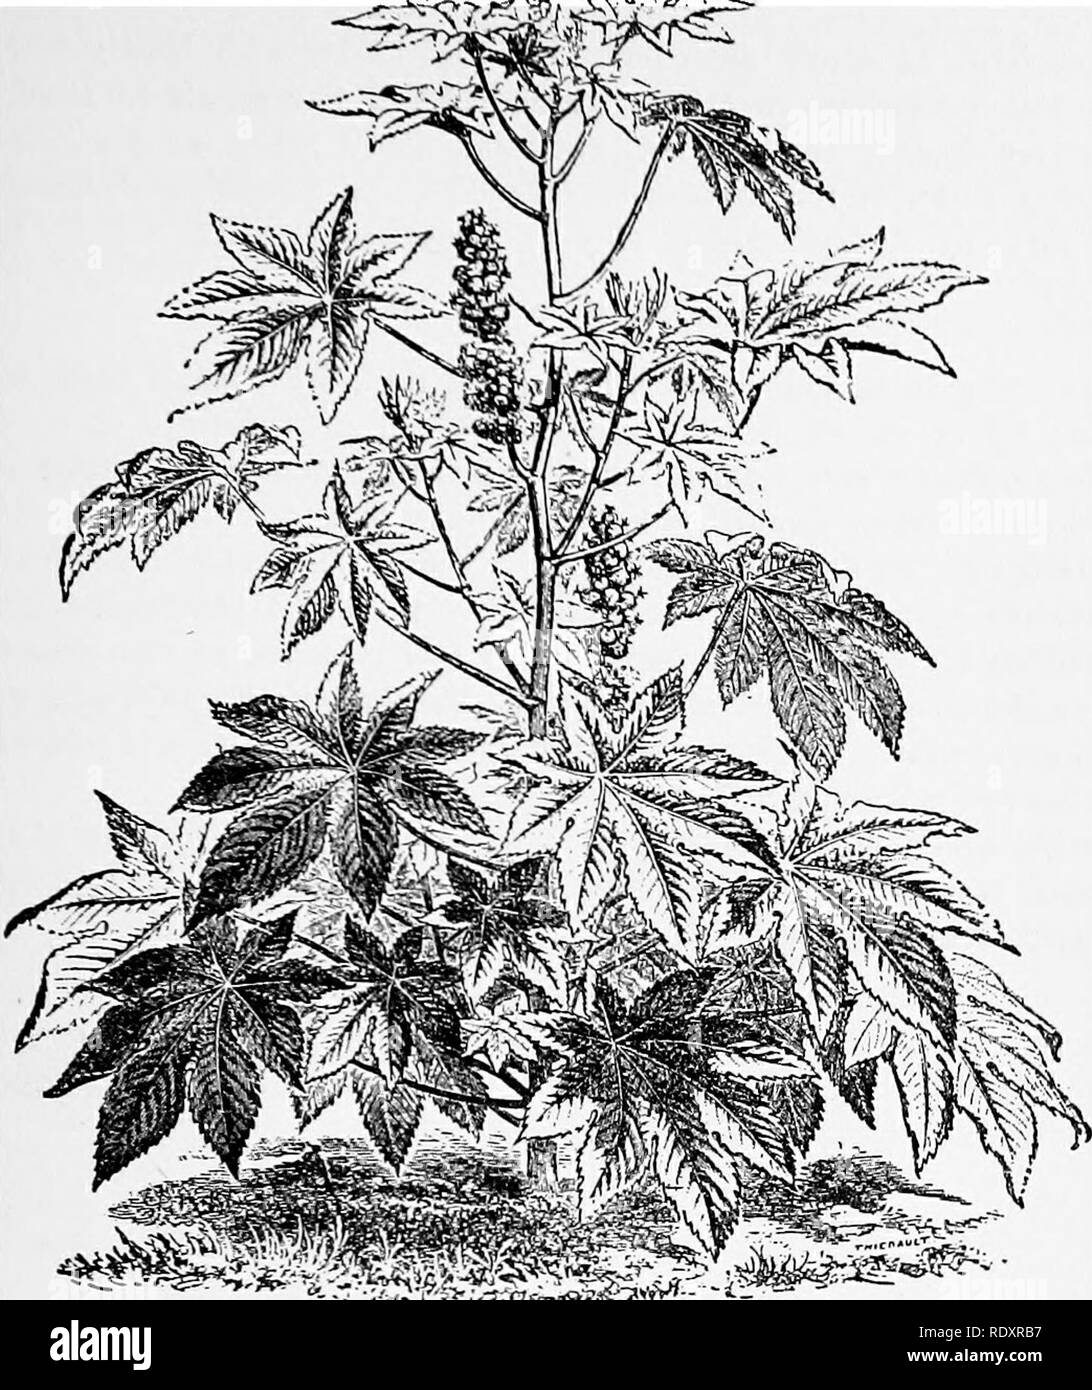 . A manual of poisonous plants, chiefly of eastern North America, with brief notes on economic and medicinal plants, and numerous illustrations. Poisonous plants. EUPHORBIACEAEâRICINUS 595. ^^â y:'i00M^0^' Fig. 330, Castor Oil Plant (Ricinus communis). Furnishes the well known castor oil of commerce. (After Faguet.) The symptoms of poisoning are vomiting, gastric pain, bloody diarrhoea and dullness of vision. Stillmarki states that the toxalbumin of castor oil bean, when injected into the circulation is more poisonous than strychnin, prussic acid, or arsenic. Quite recently Dr. W. N. Bispham ^ Stock Photo